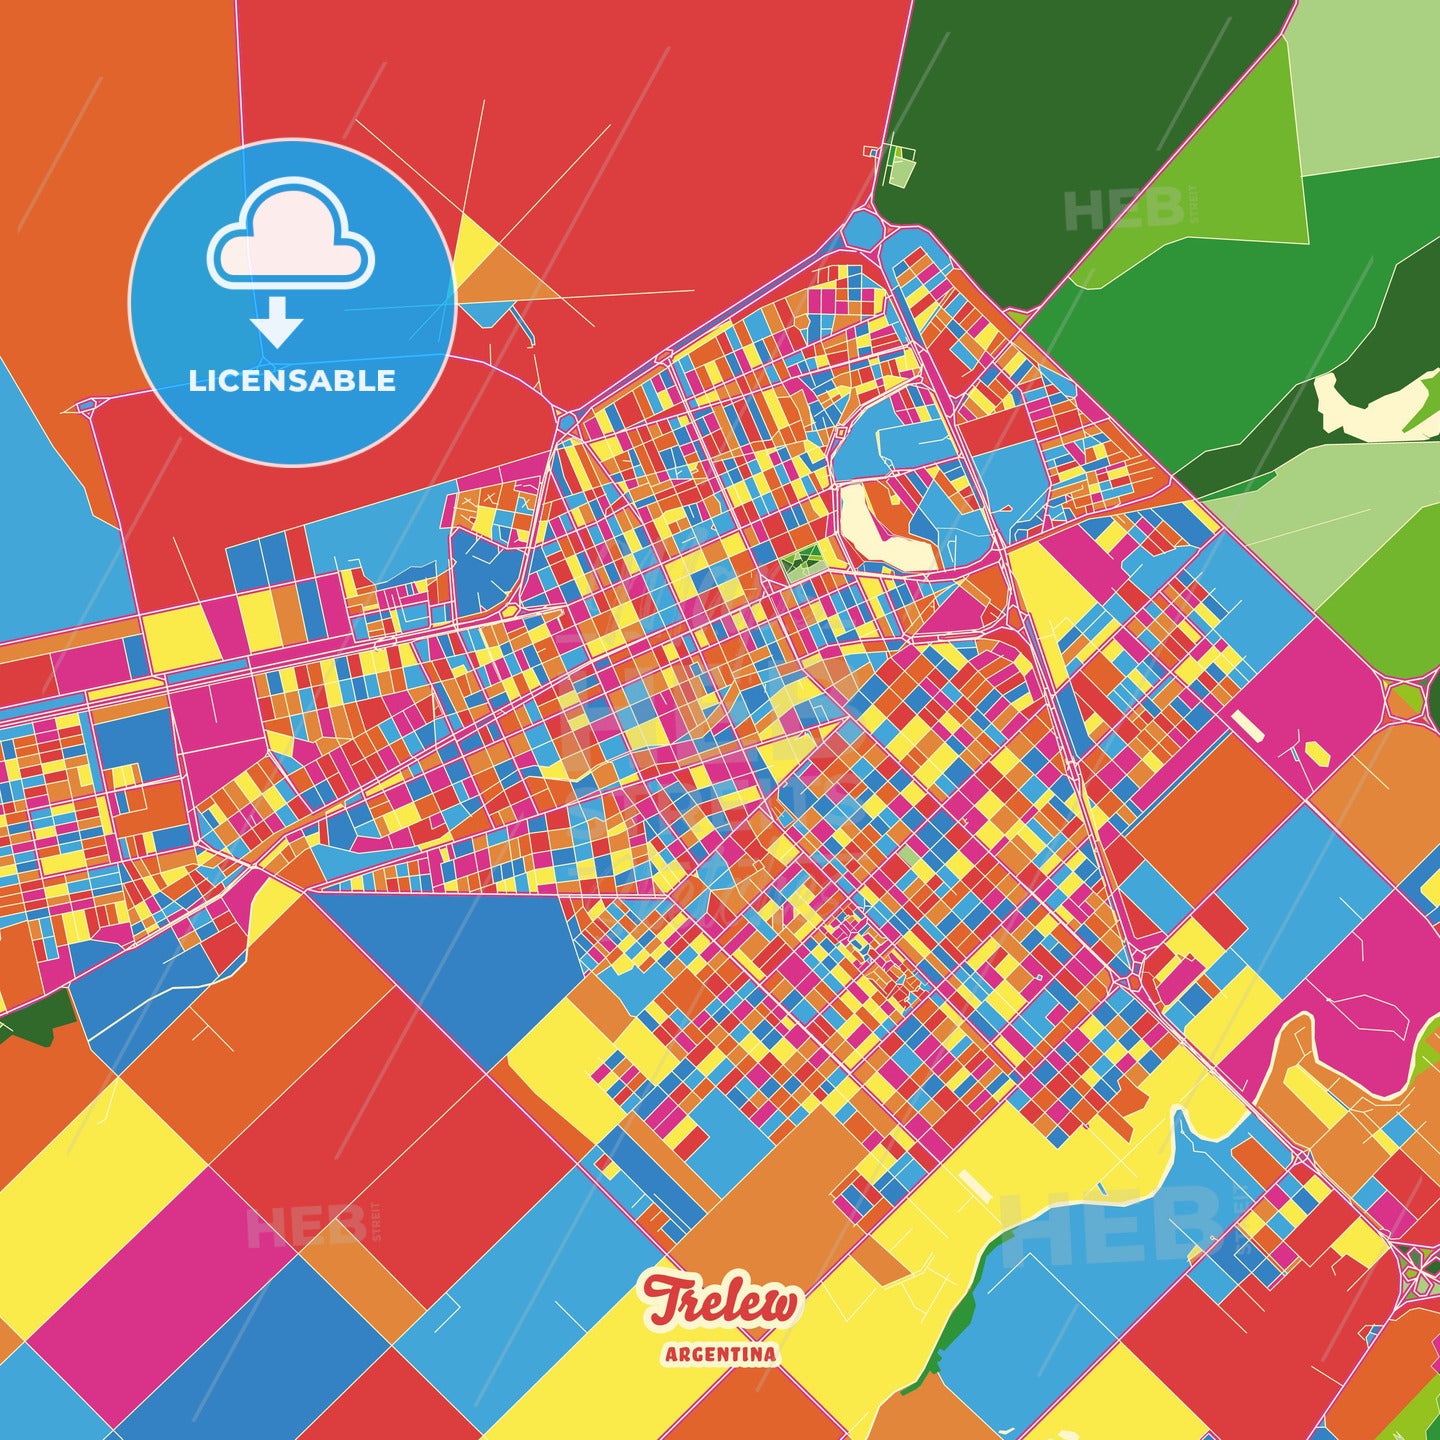 Trelew, Argentina Crazy Colorful Street Map Poster Template - HEBSTREITS Sketches